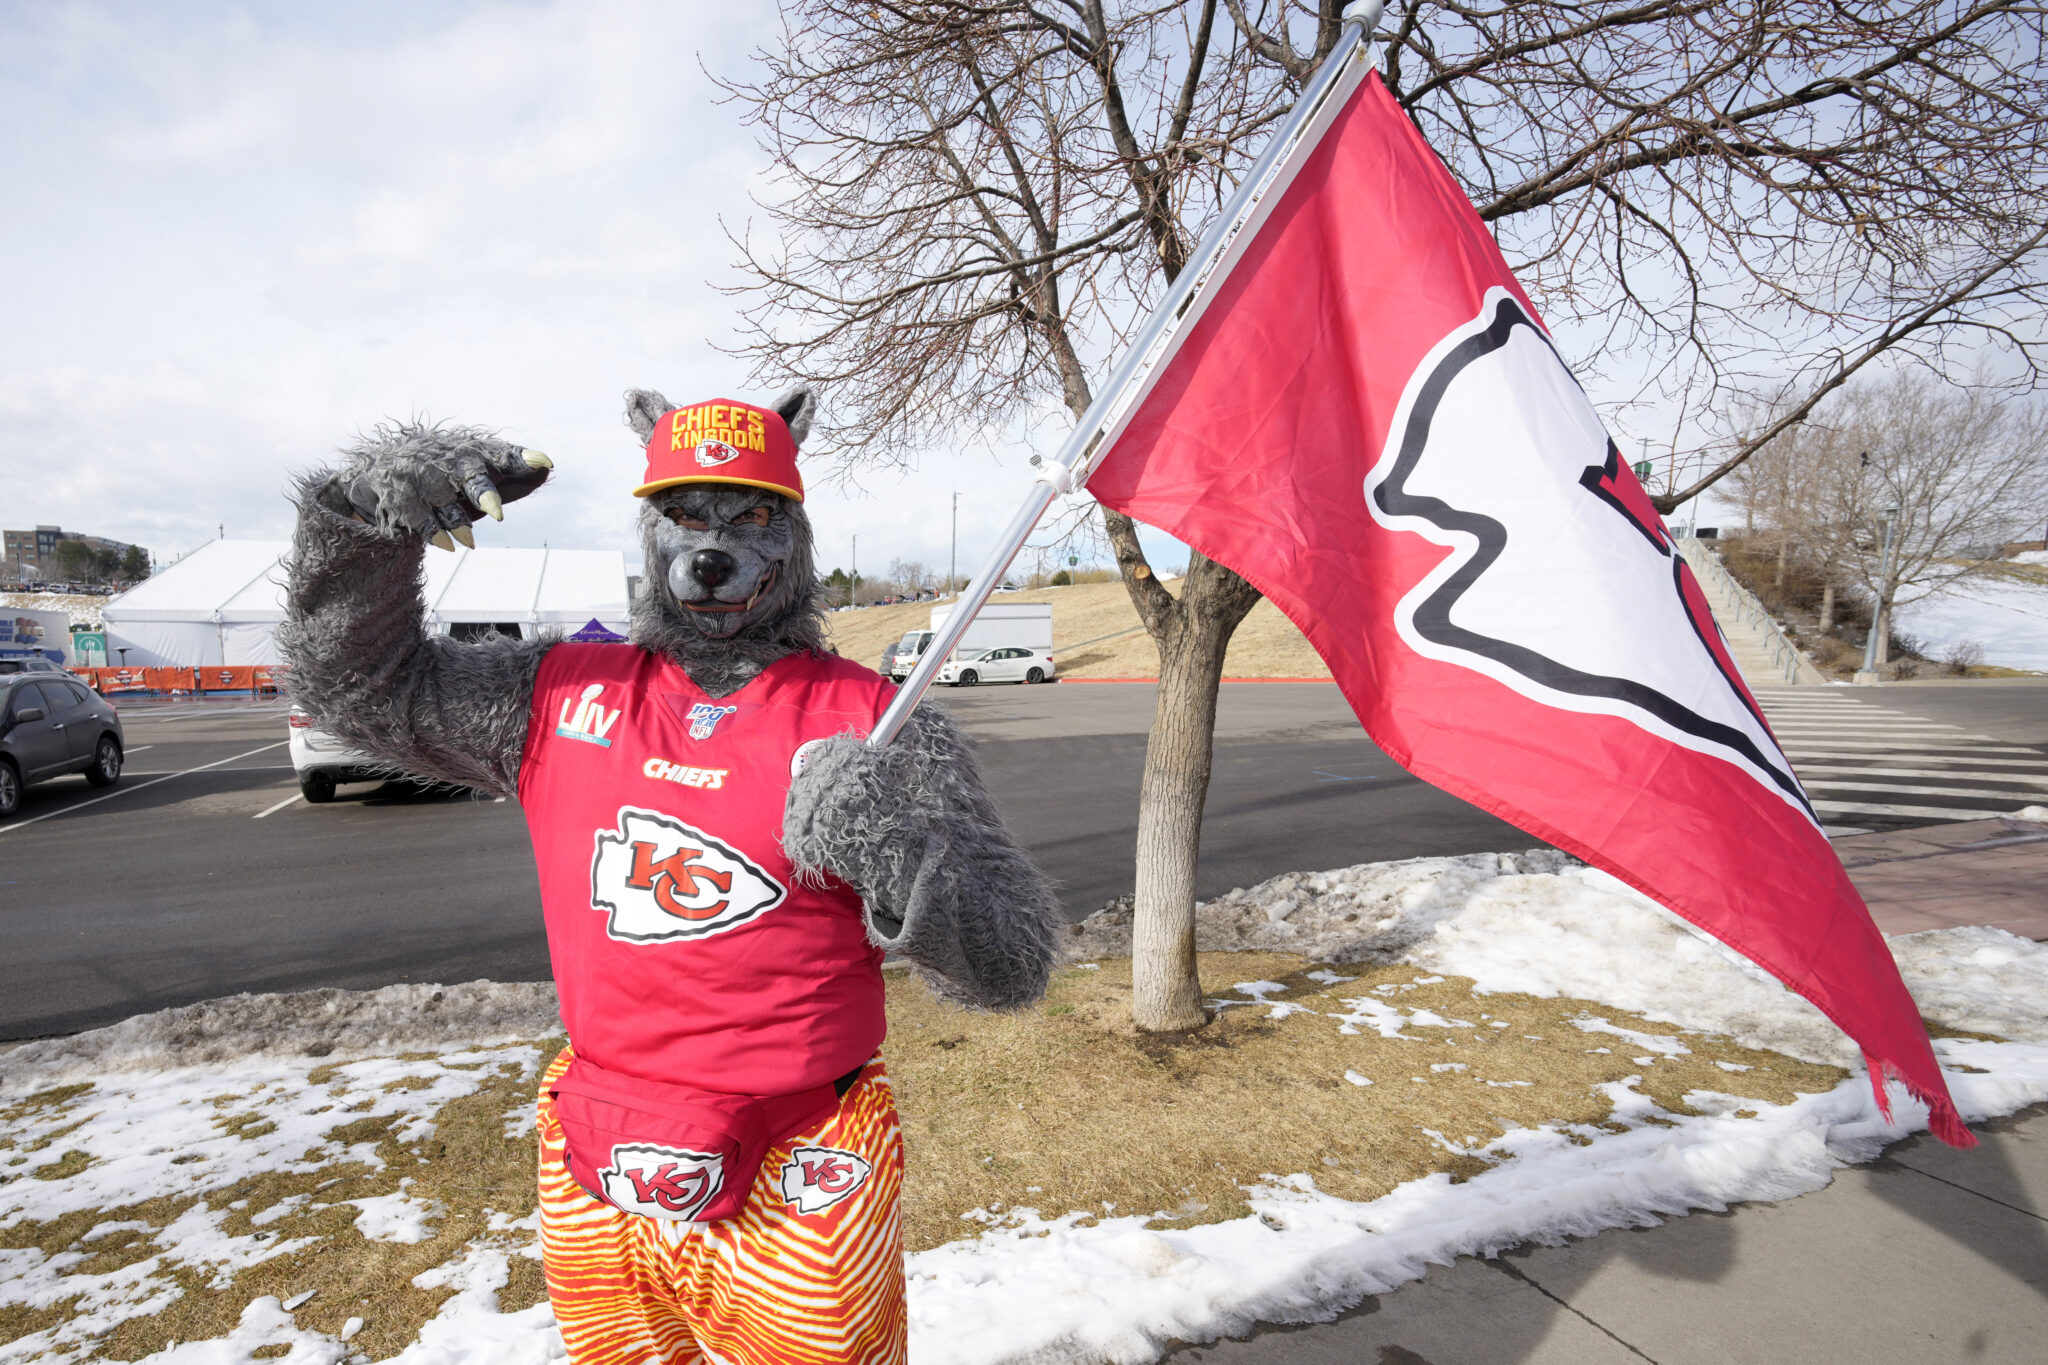 Kansas City Chiefs Superfan ‘ChiefsAholic’ Arrested for Laundering, Robbery After Months on the Run (mediaite.com)